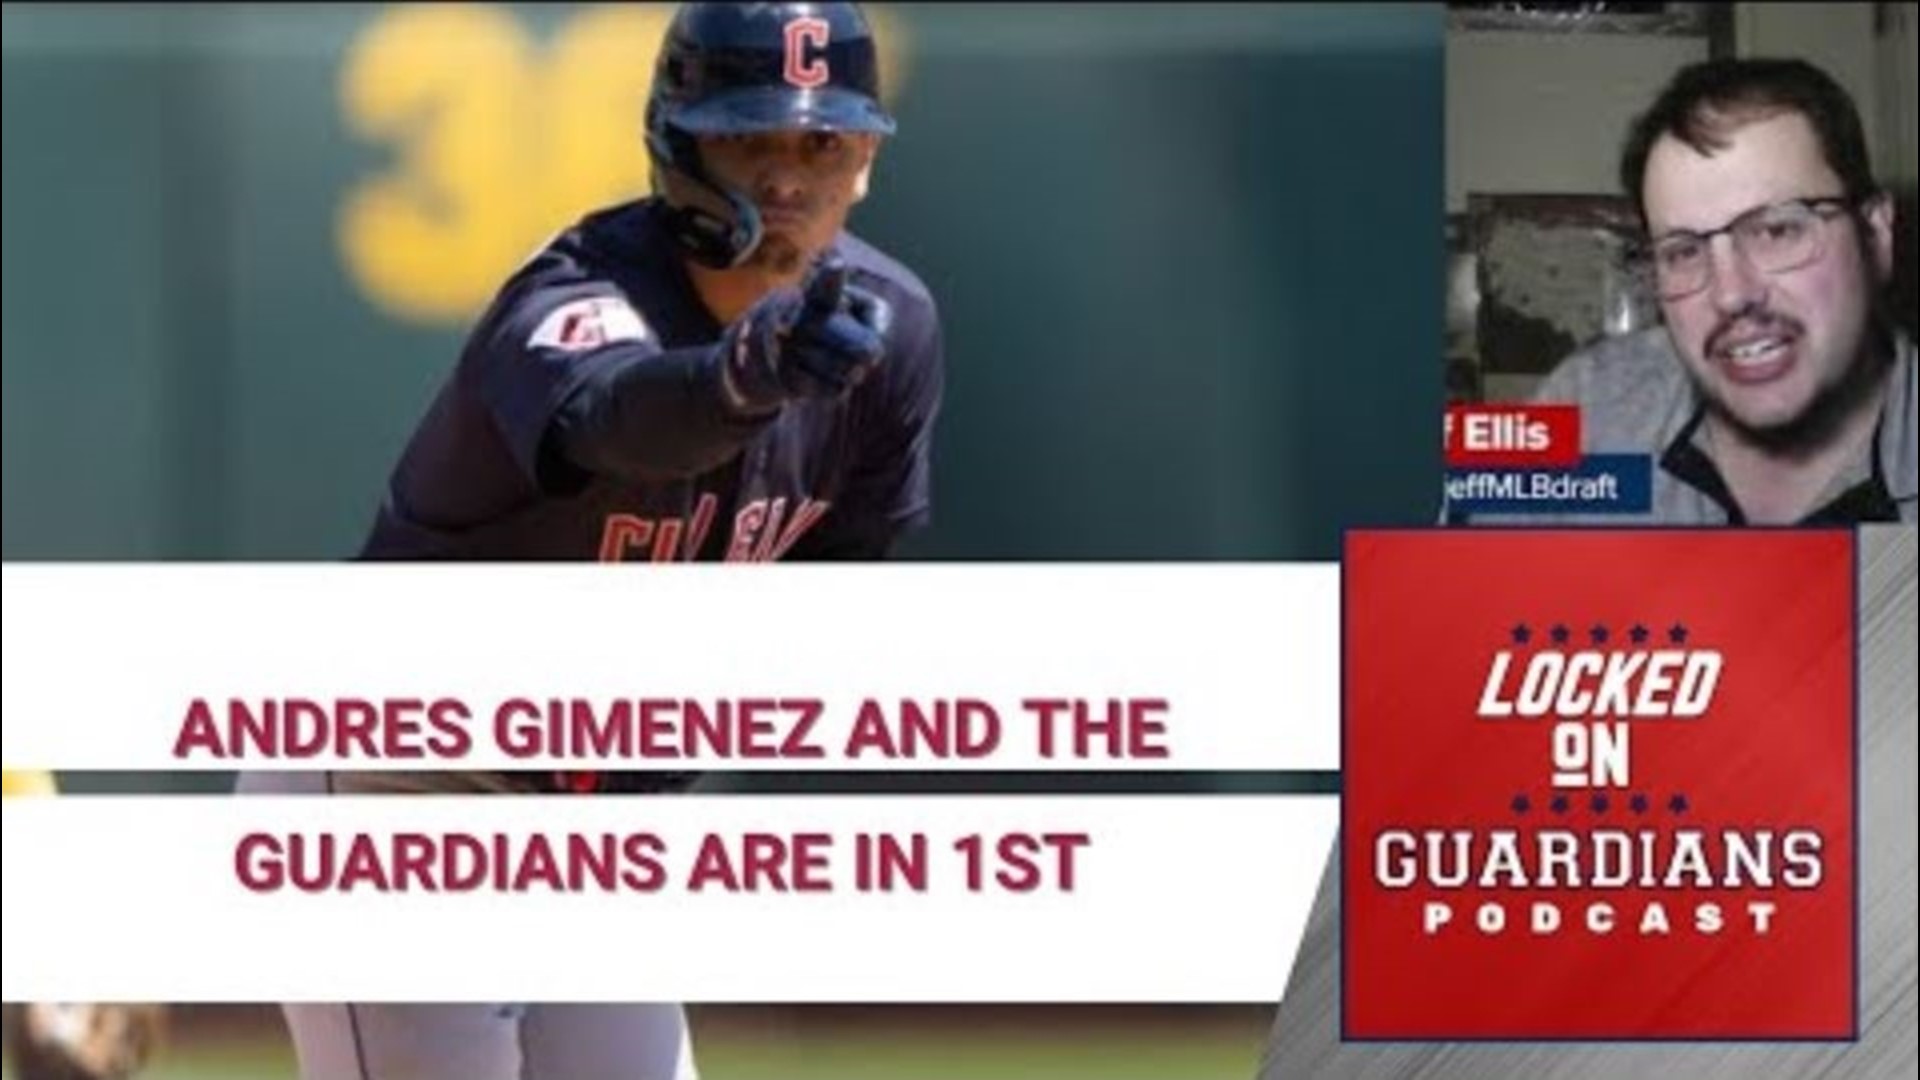 We take some time to celebrate as the Guardians move into a tie for first place with a lot of thanks for All-Star Andres Gimenez.